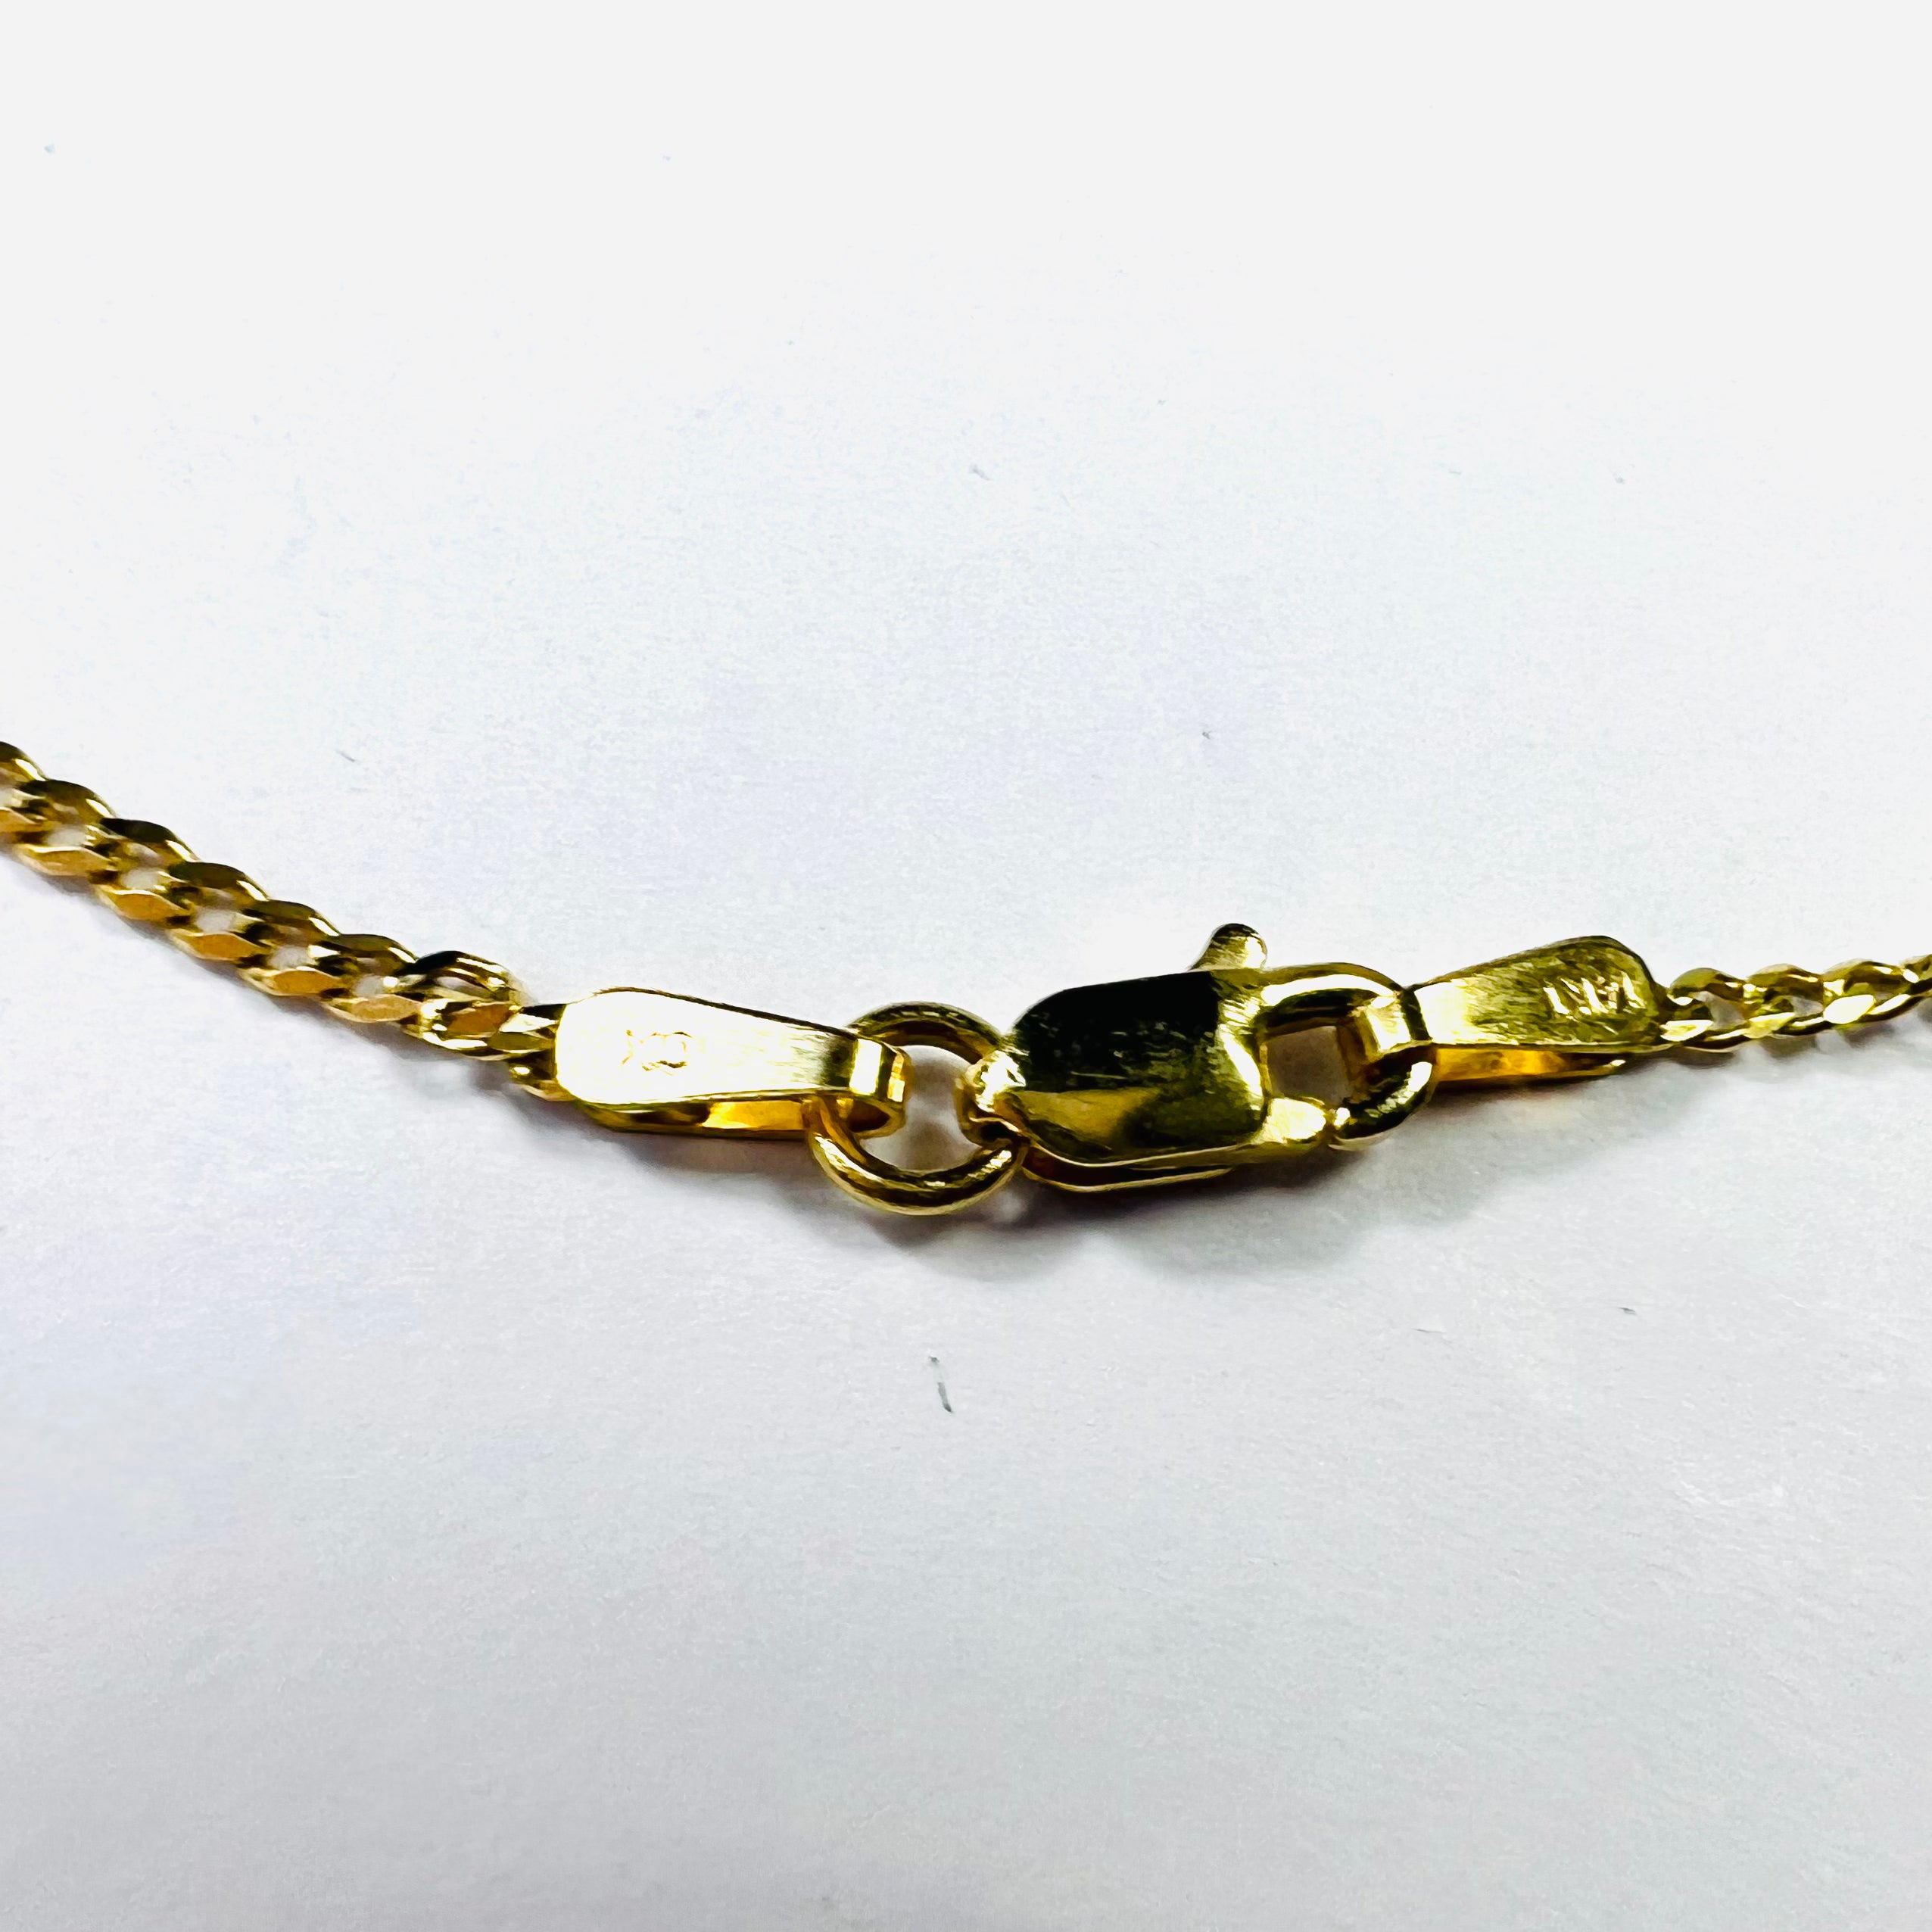 Rough Emerald Stationed 17.5" 14K Yellow Gold Cuban Chain Necklace